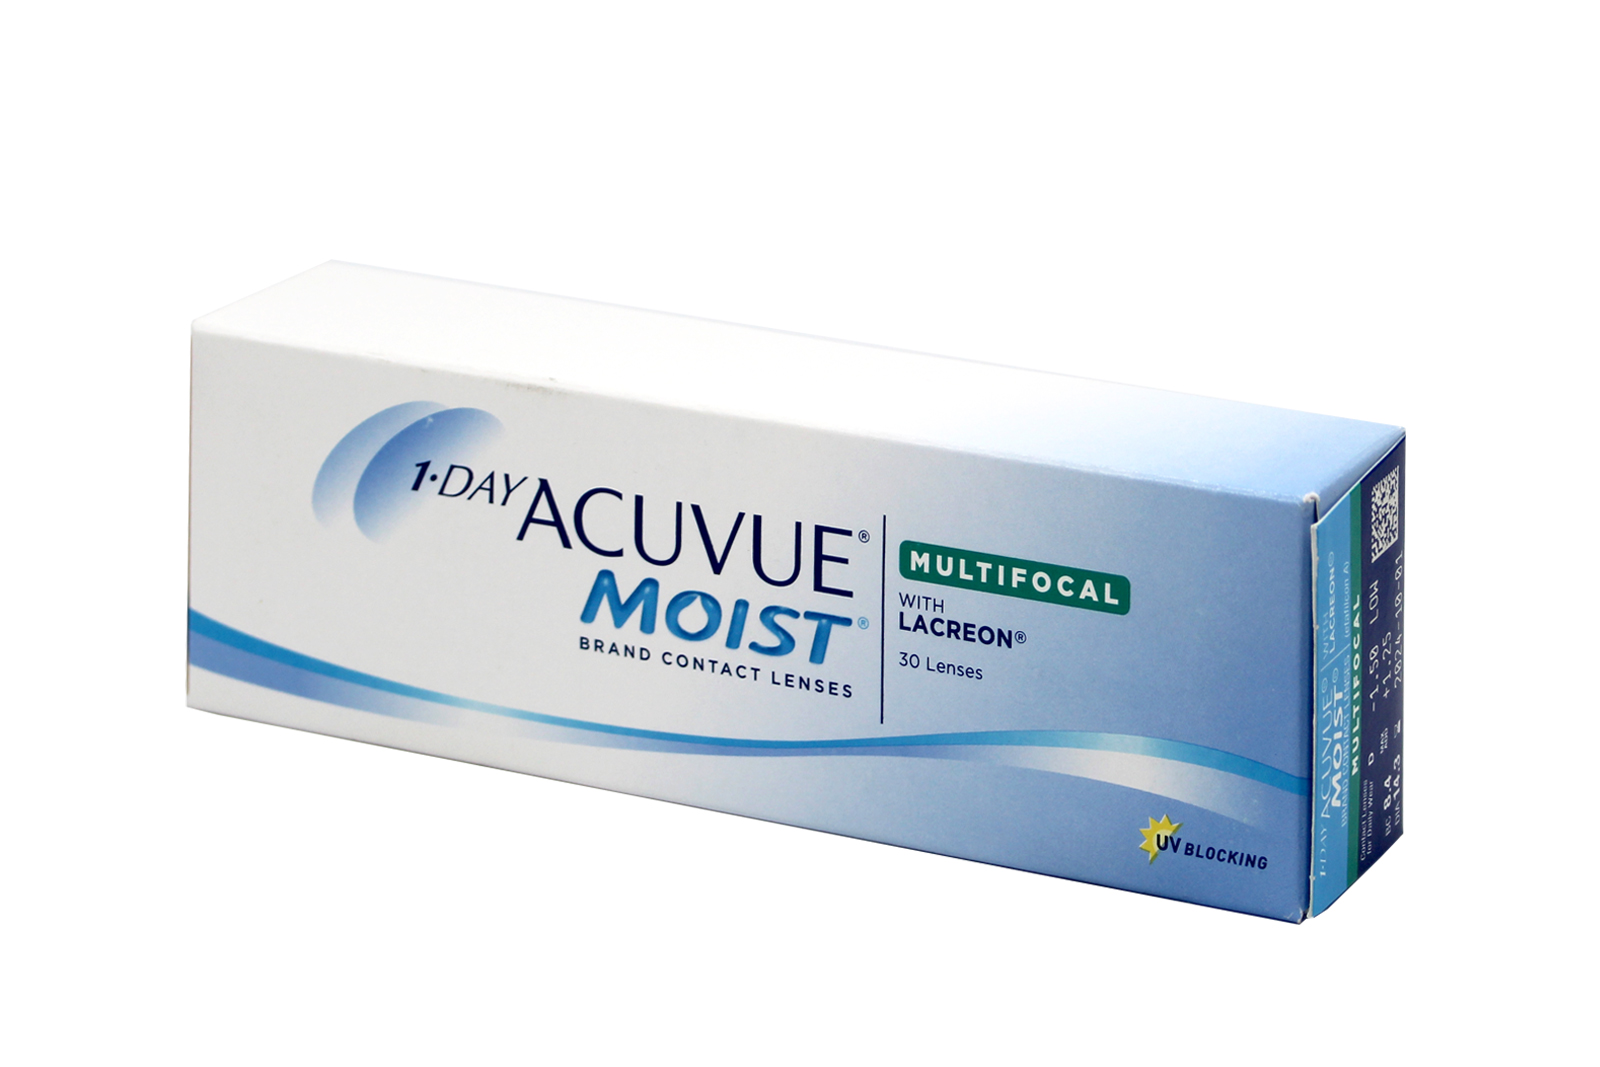 Acuvue Moist 1-Day Multifocal